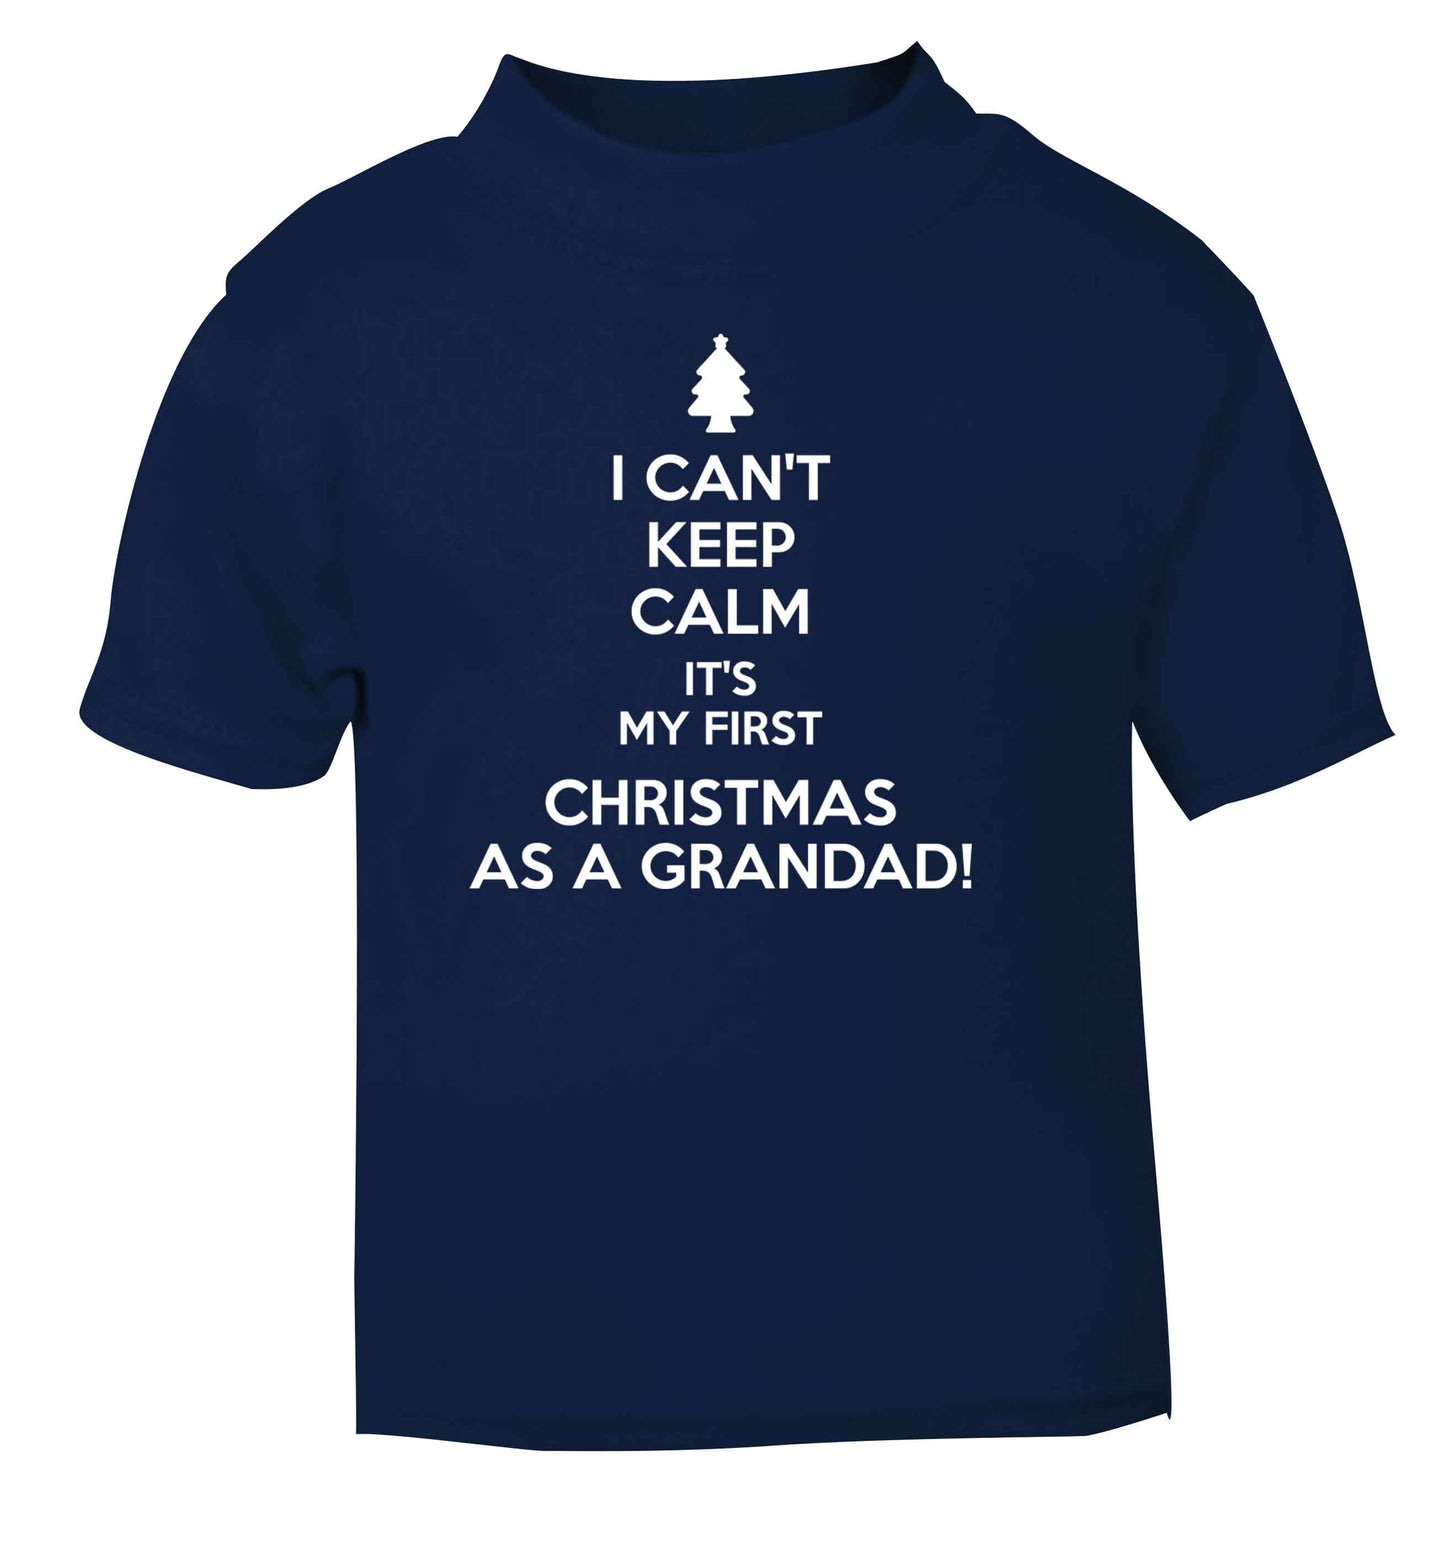 I can't keep calm it's my first Christmas as a grandad! navy Baby Toddler Tshirt 2 Years